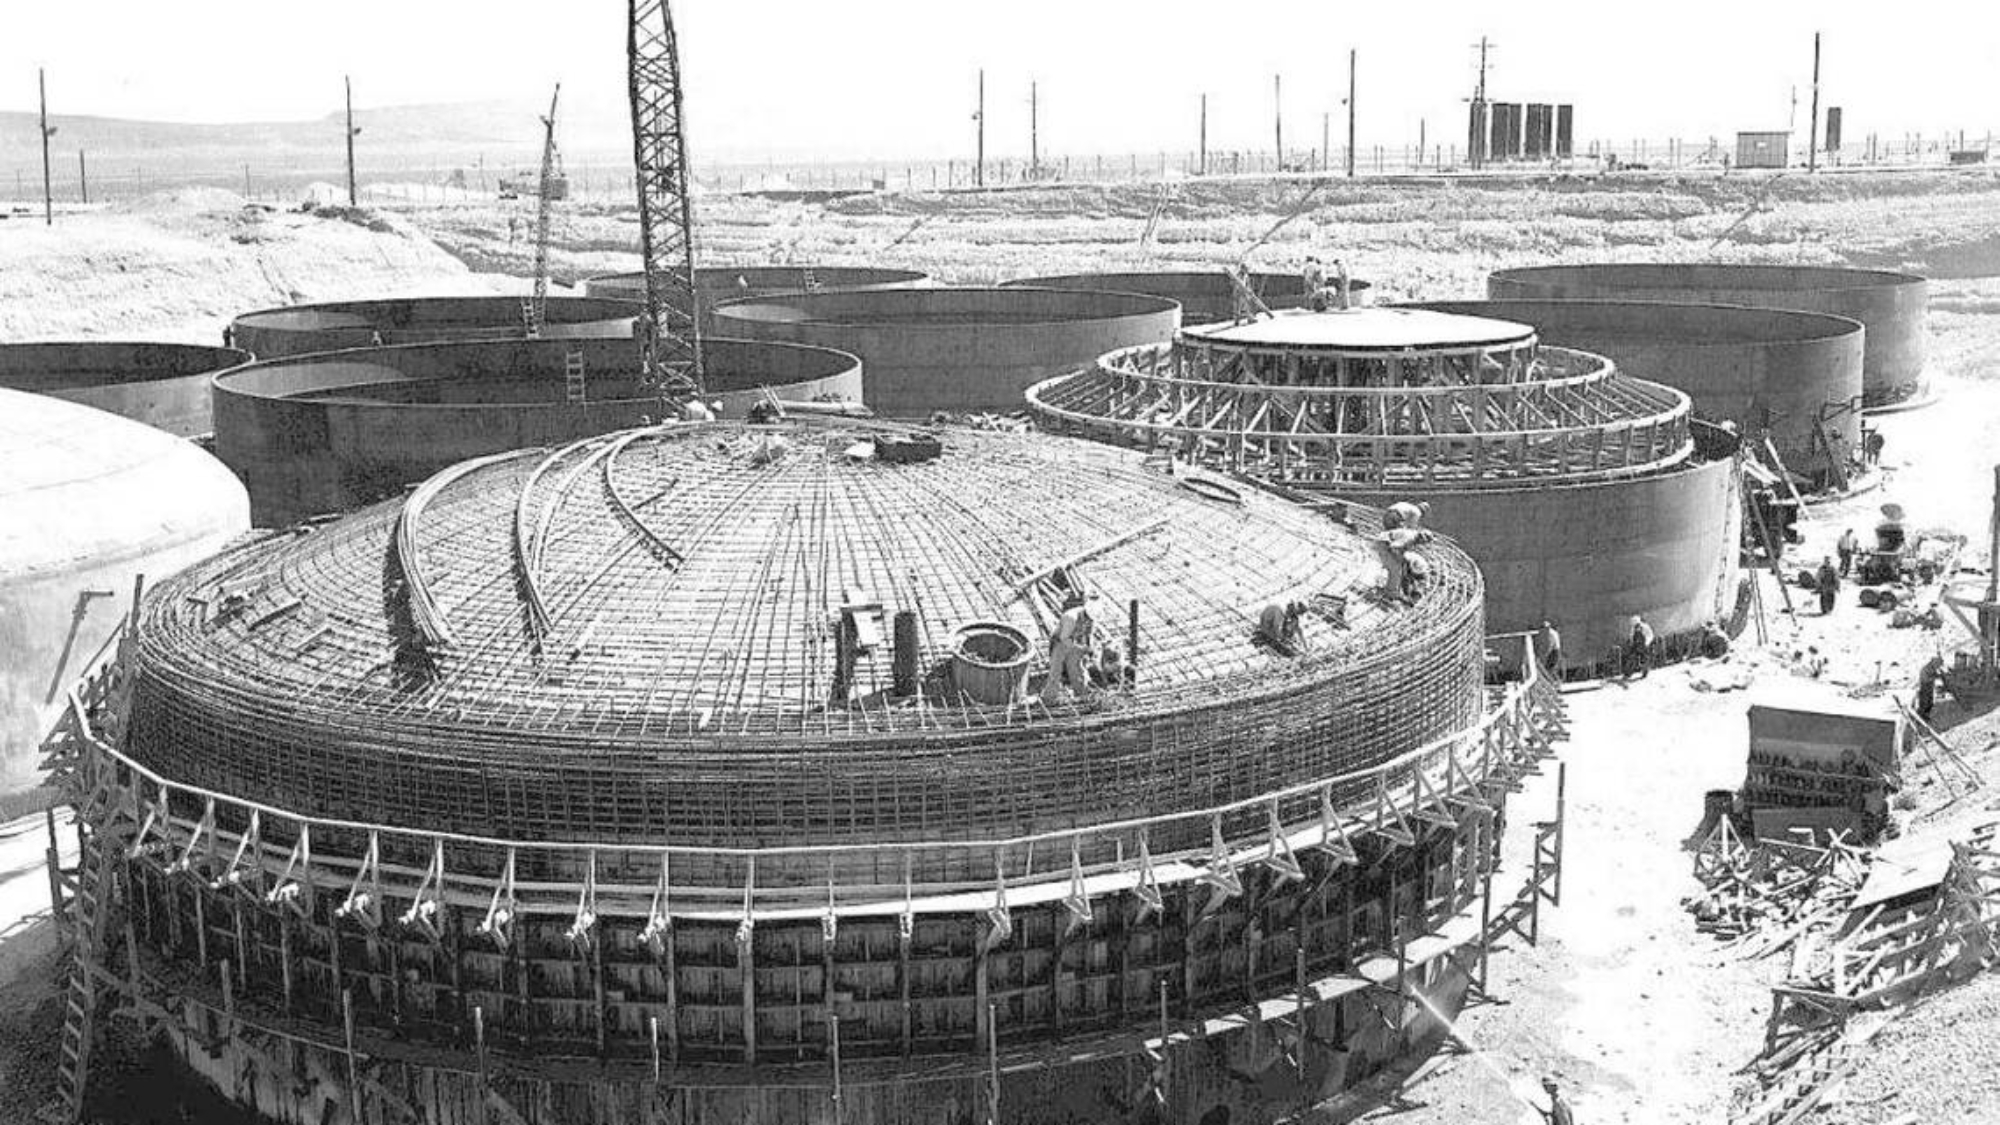 Construction of a single-shell nuclear waste storage tank at the Hanford Nuclear Reservation, circa 1943. Source: U.S. Department of Energy, hanford.gov.